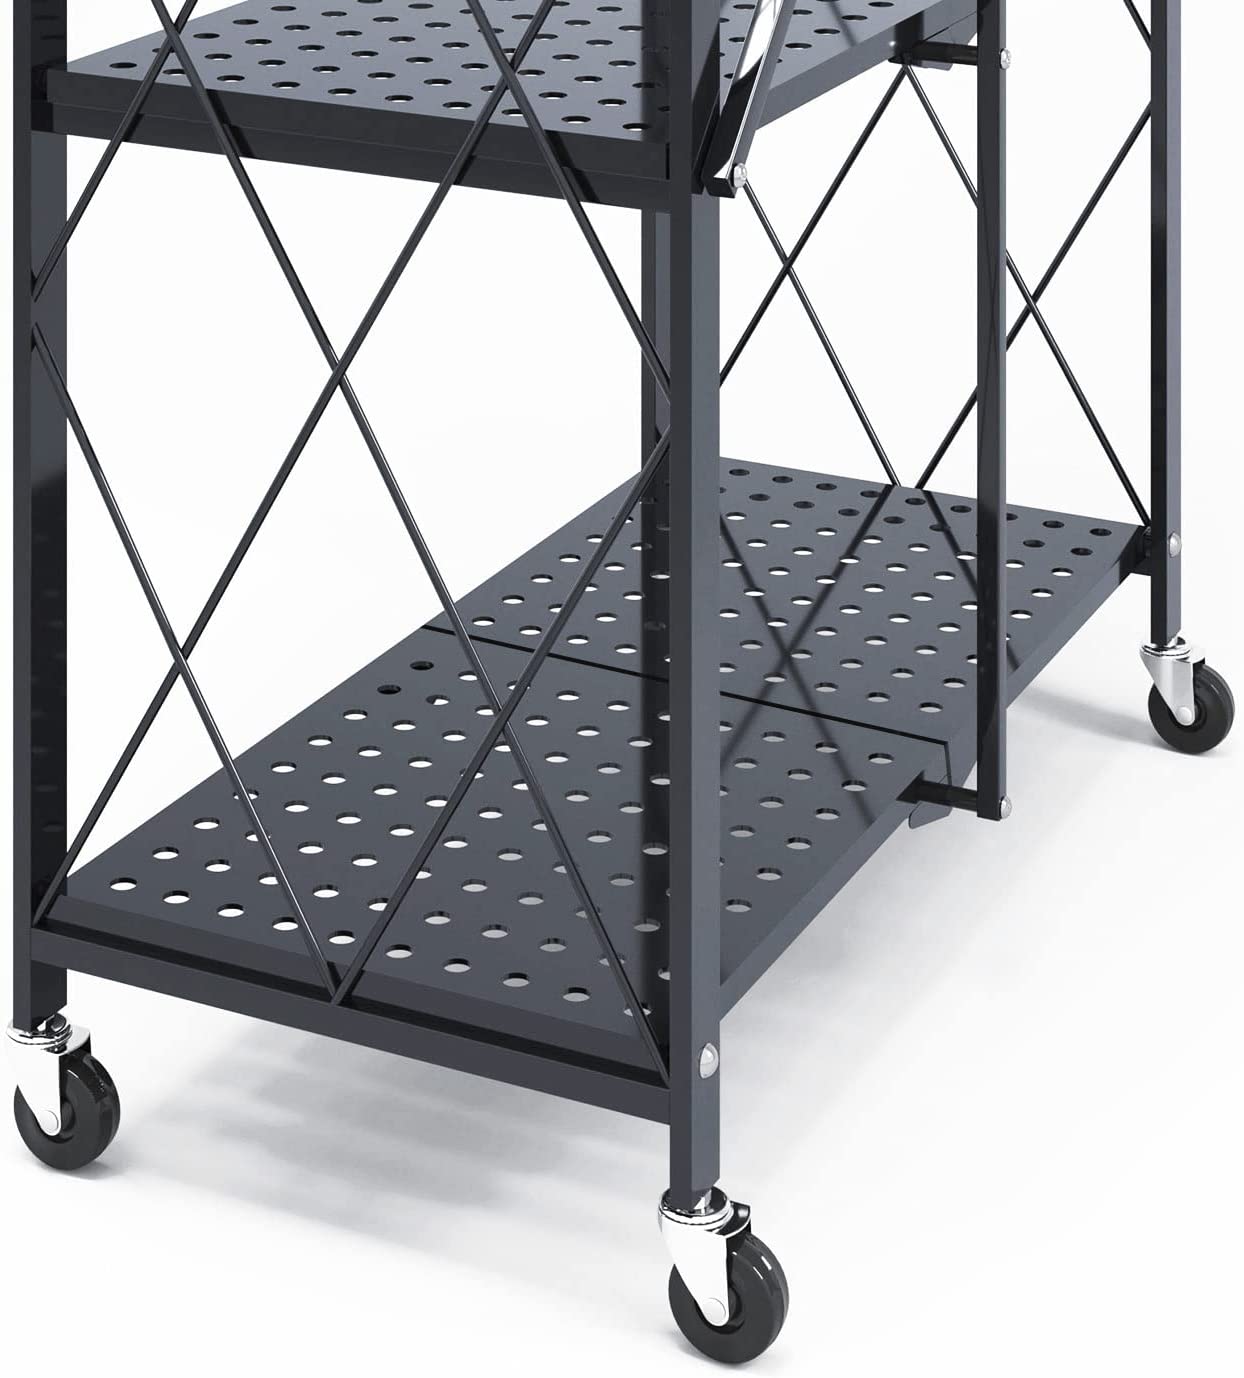 Soges 3-Tier Foldable Metal Storage Shelf Rolling Rack with Wheels Moving Utility Cart for Home Office Kitchen Garage， Black